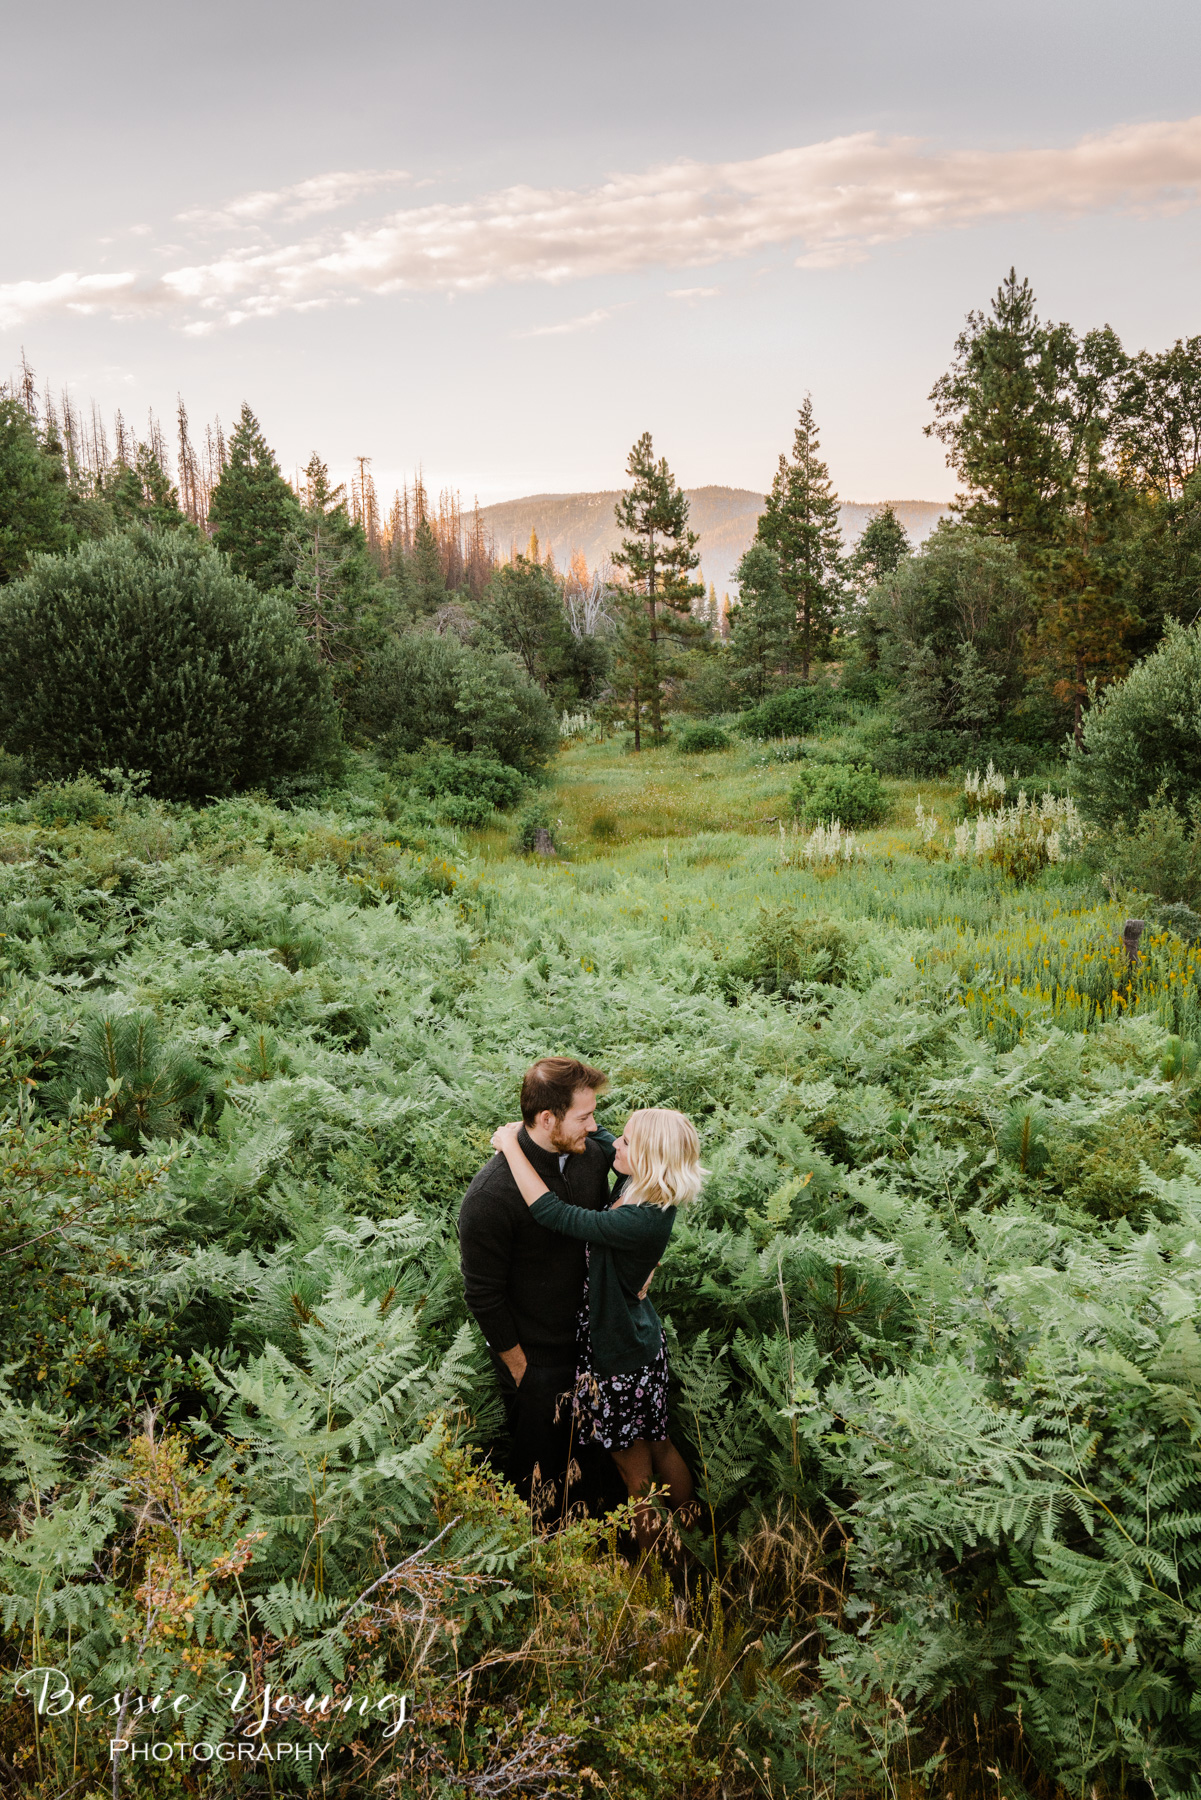 Shaver Lake Engagement Portraits - Meghan and Clay -  by Bessie Young Photography 2018 A7R2-6.jpg